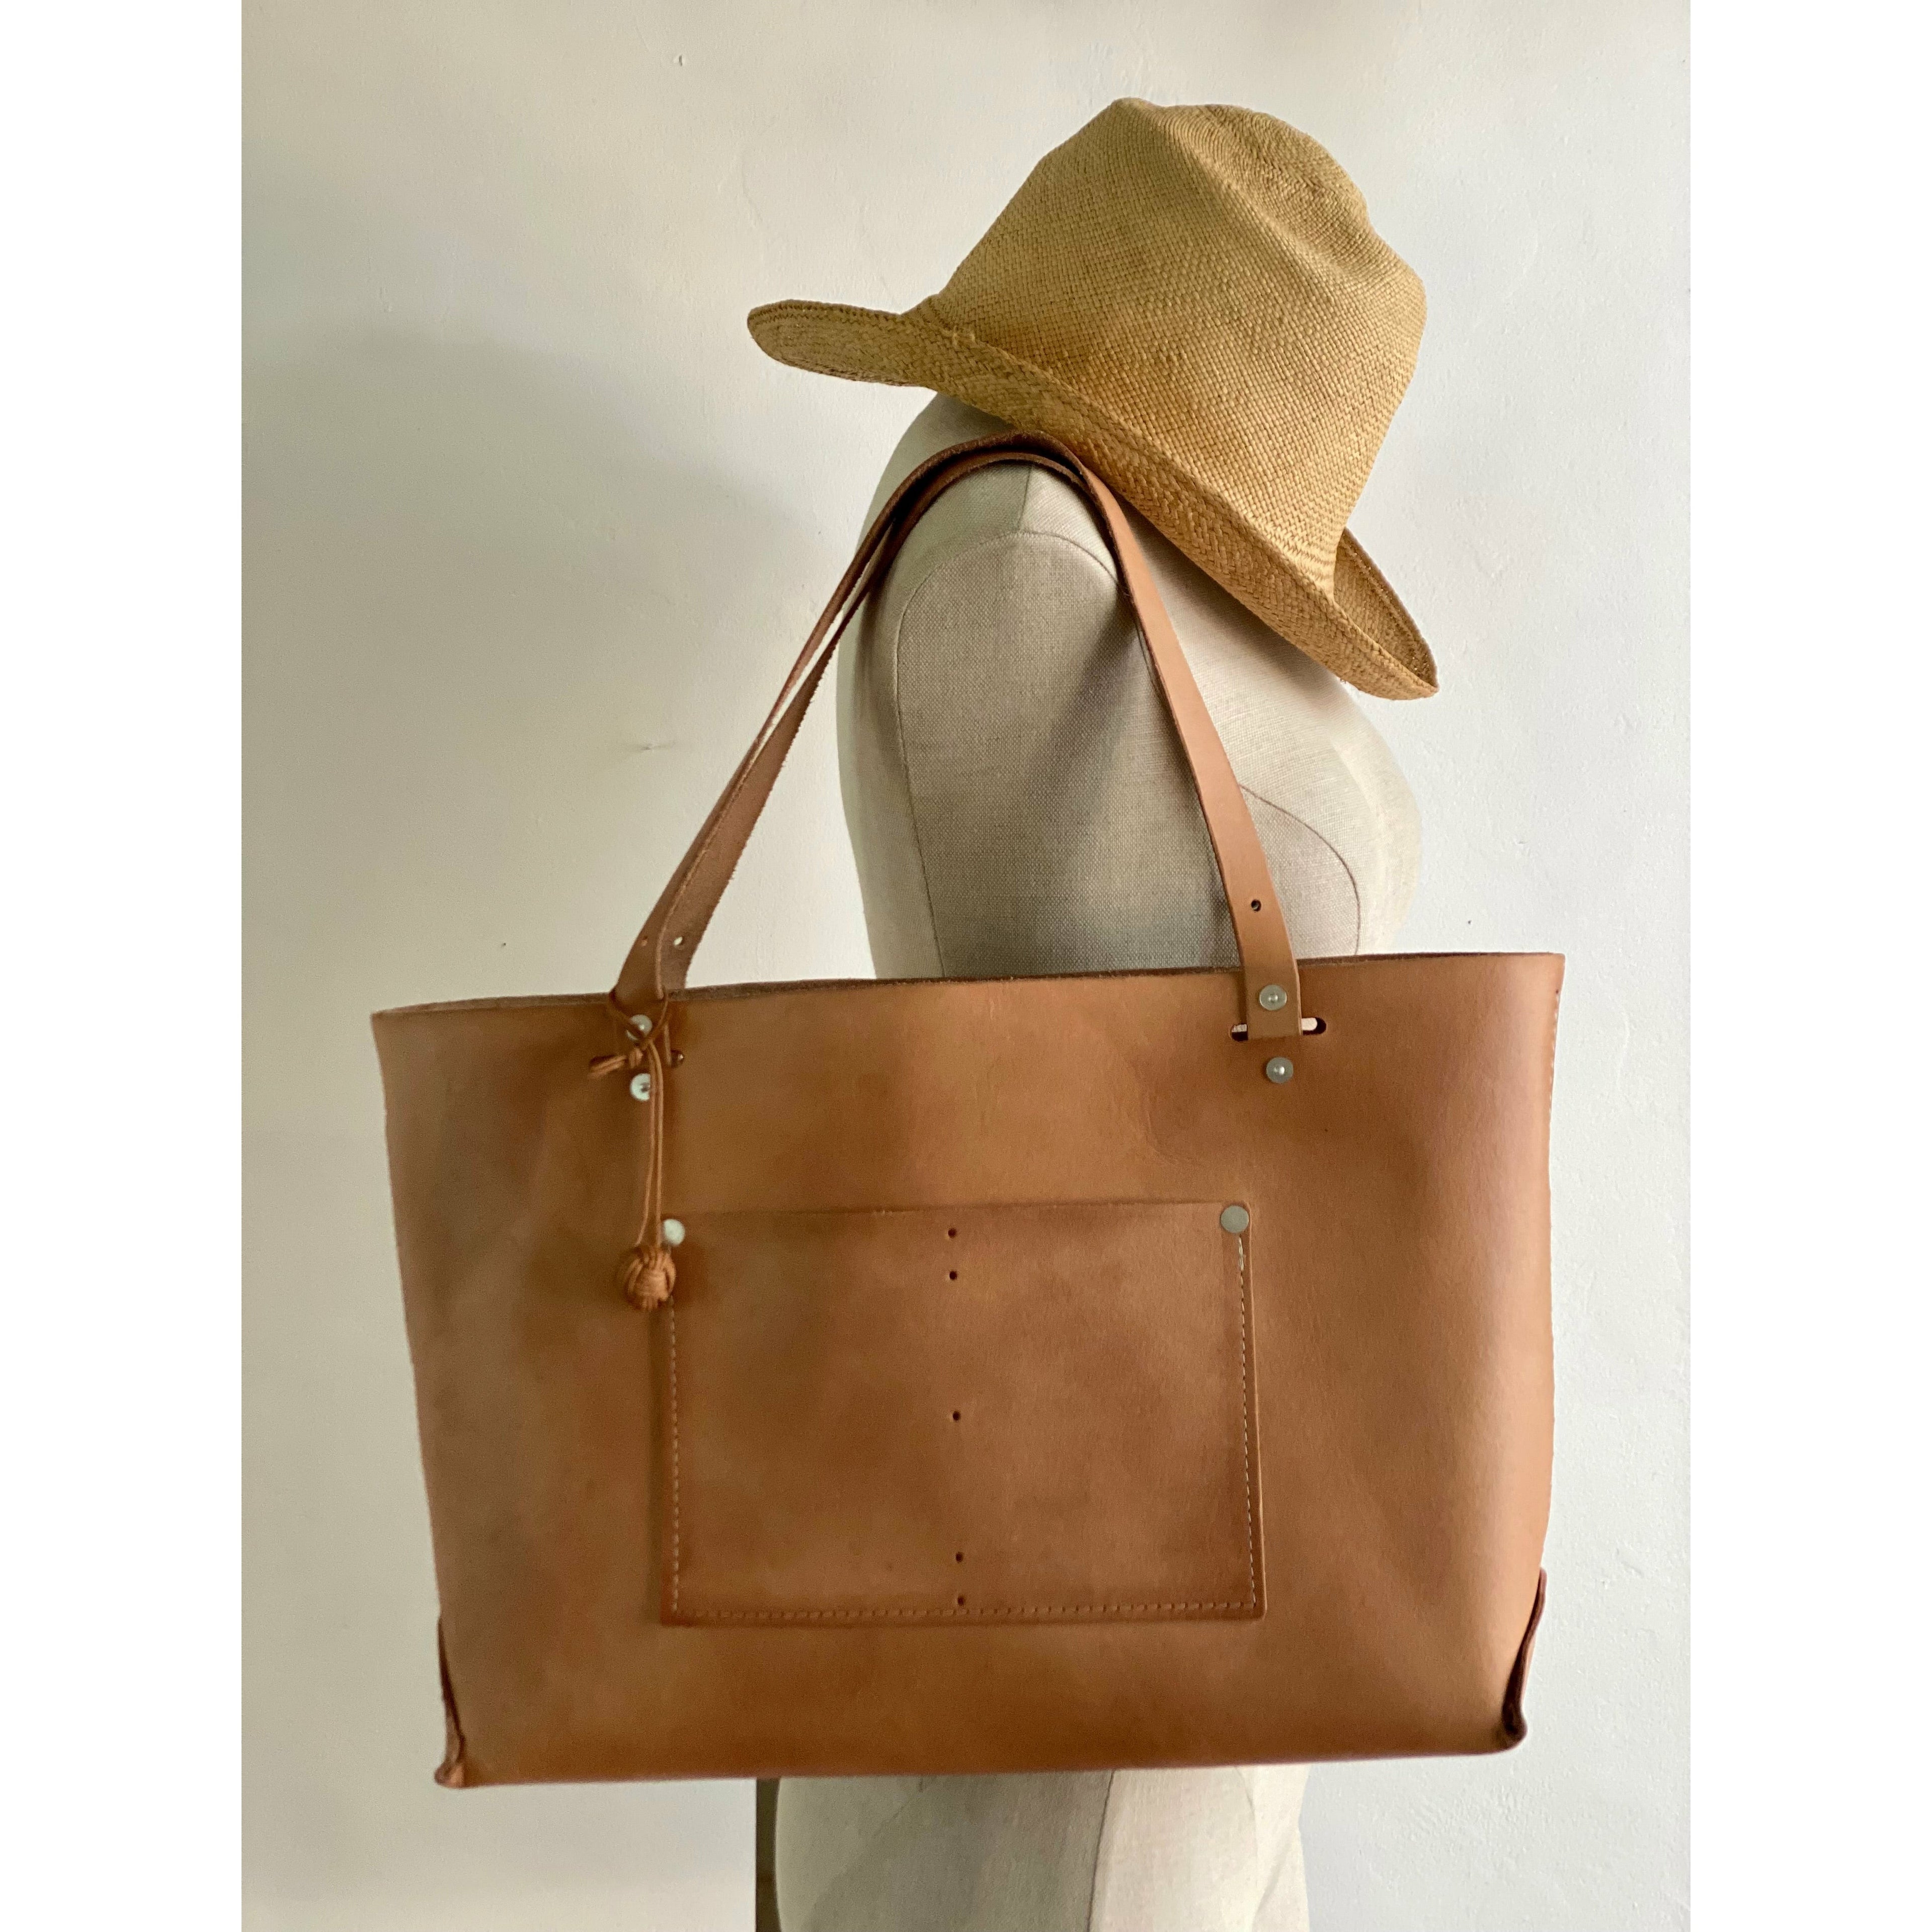 Large Leather Bag or Tote with outside pockets and should length straps.